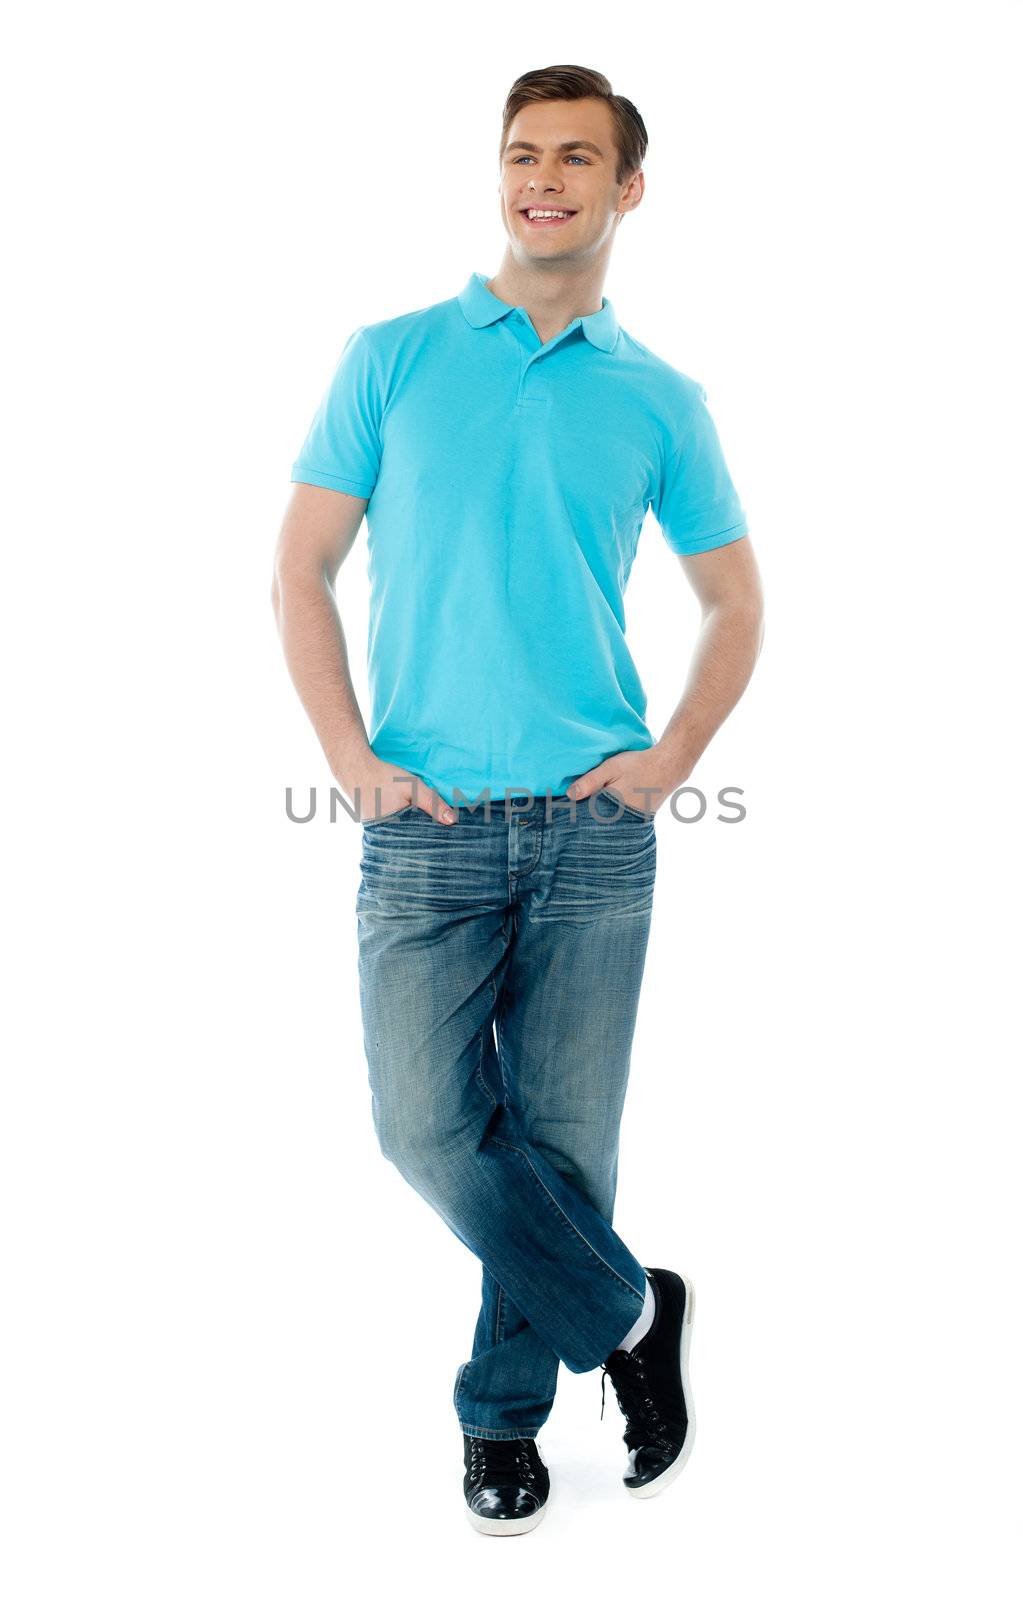 Full-body pose of smiling man posing in casuals with crossed legs